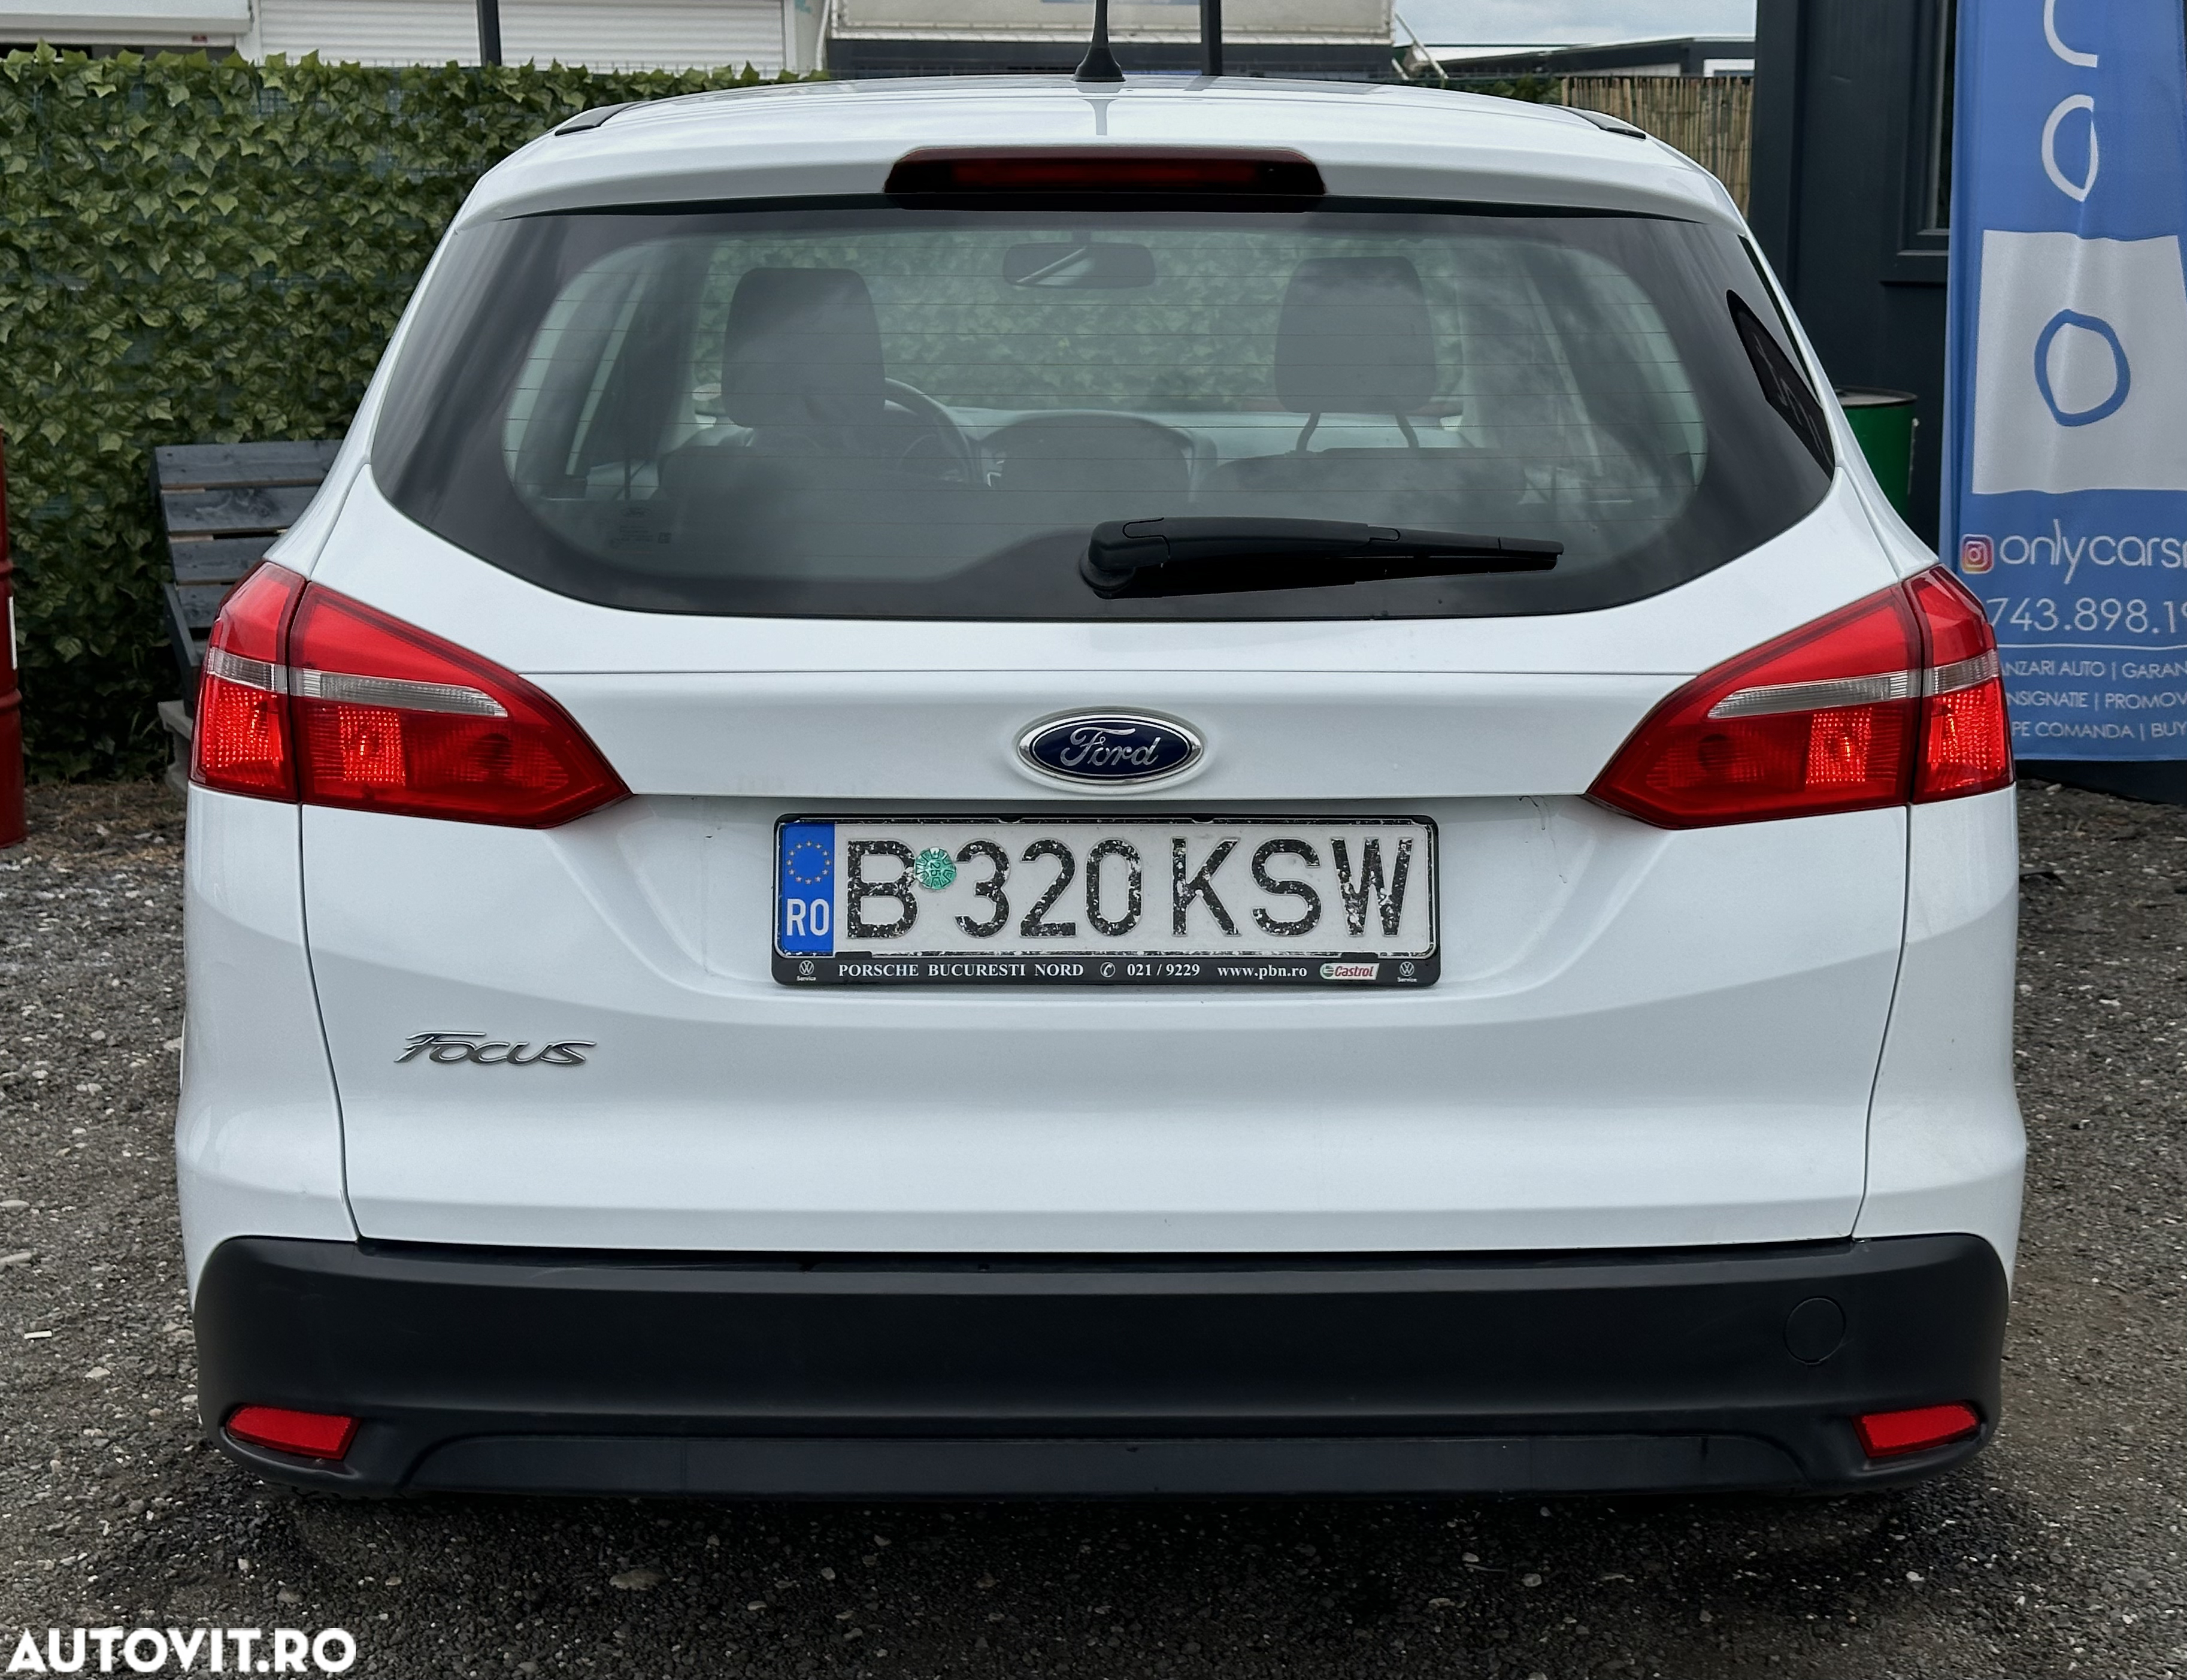 Ford Focus 1.6 Ti-VCT Powershift Trend - 23